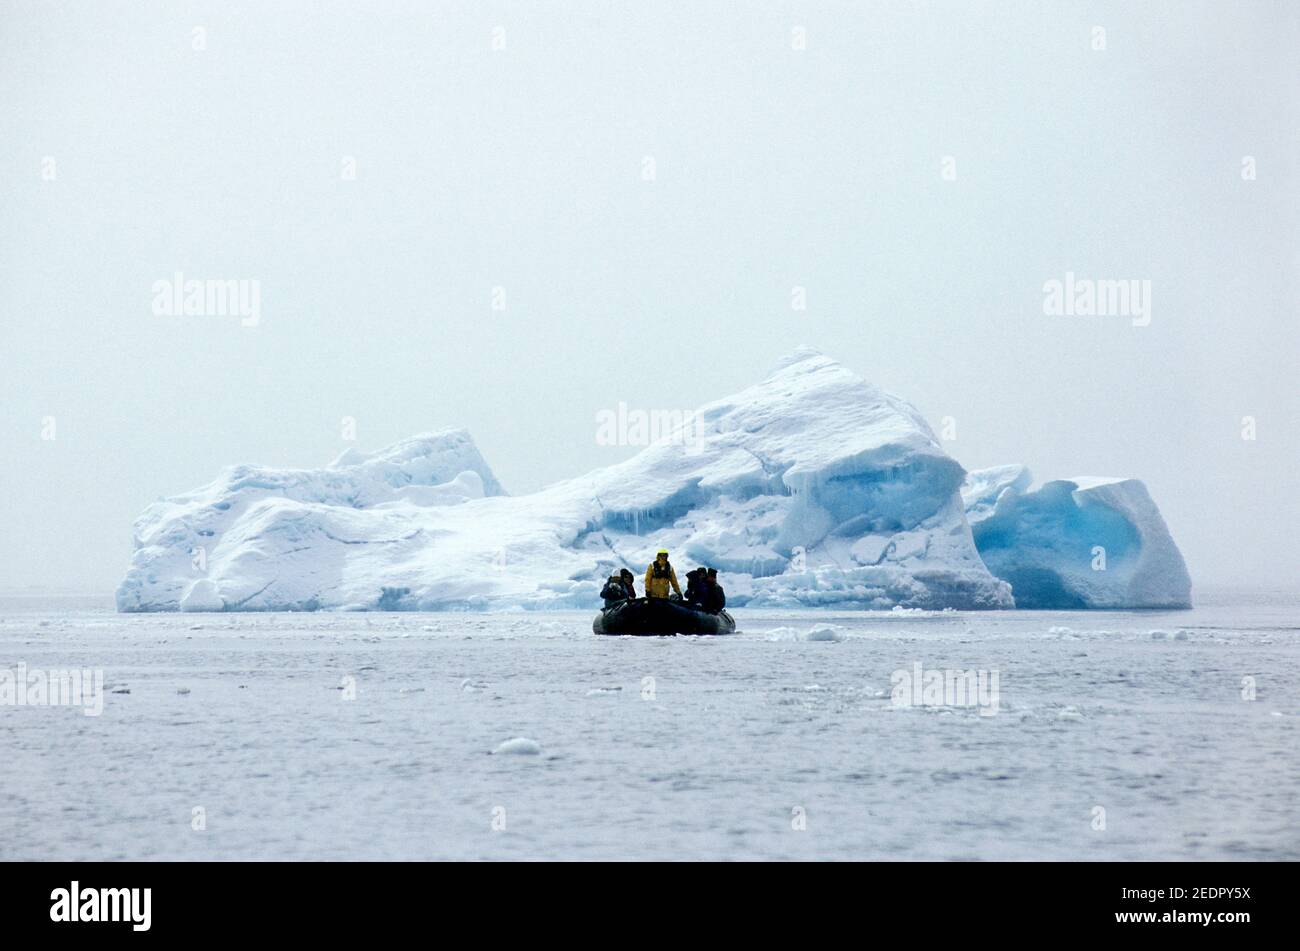 A zodiac with tourists is returning after checking out an iceberg on Antarctica Stock Photo